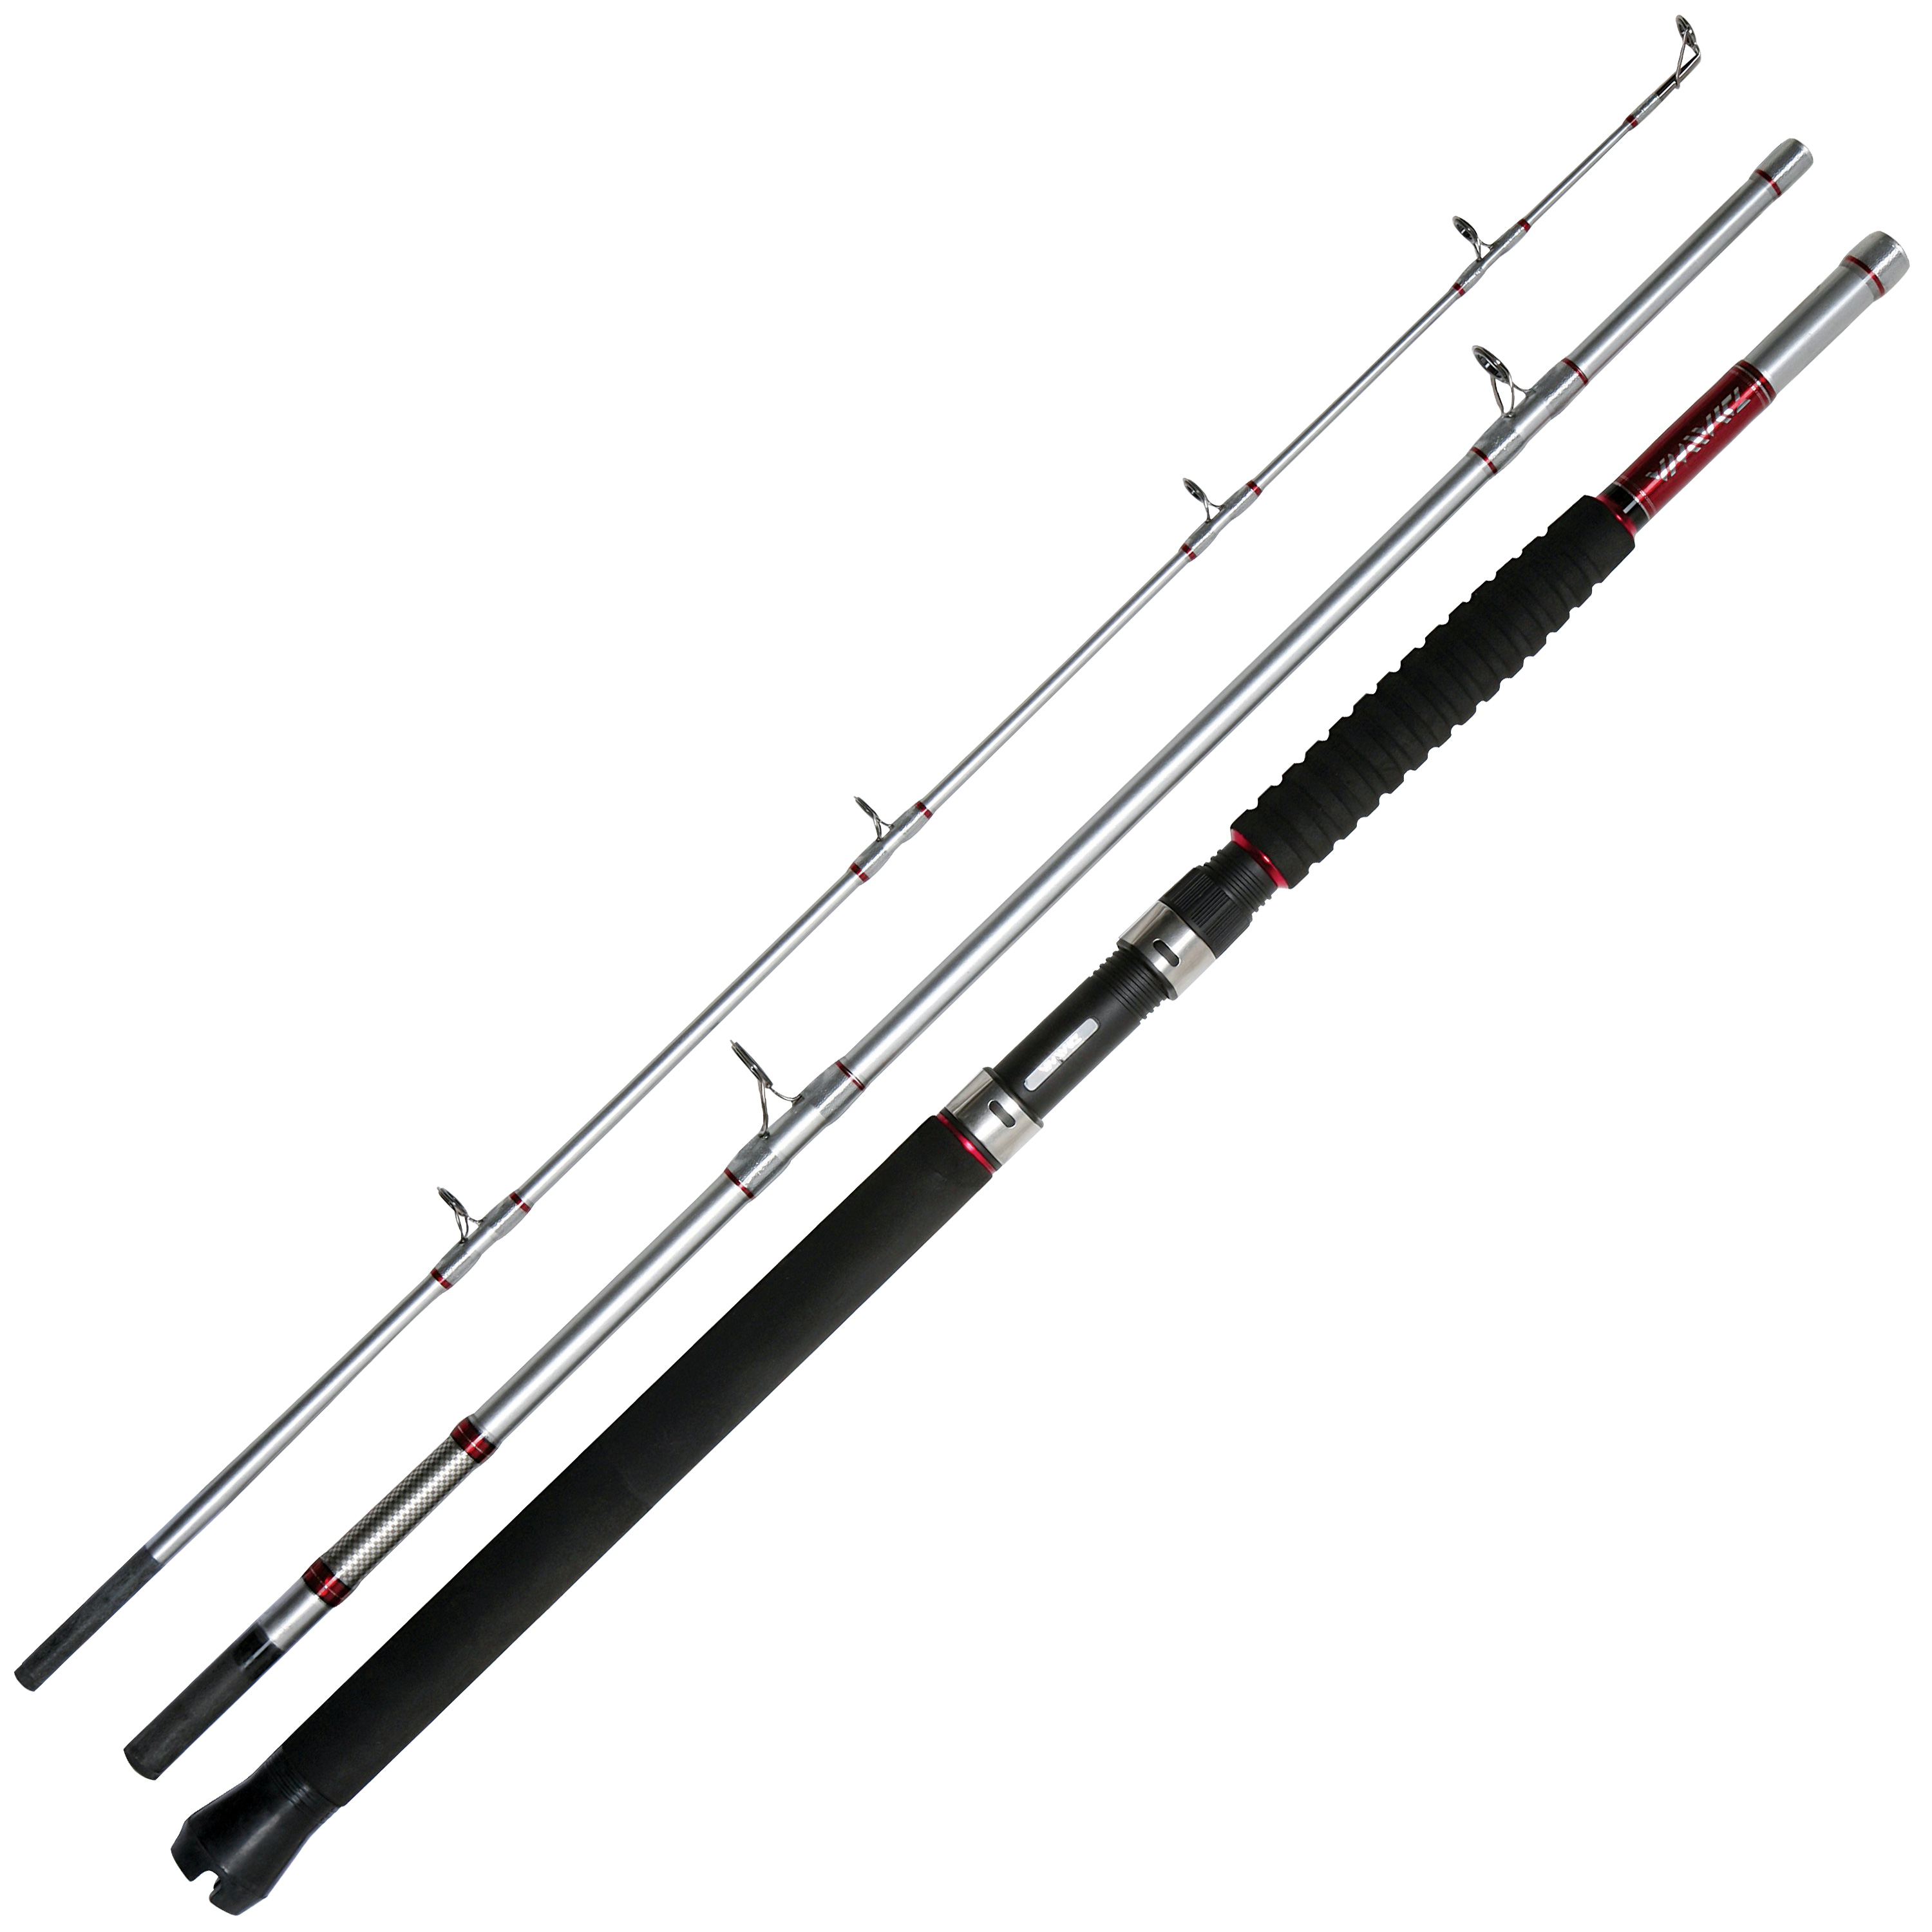 Zebco Great White GWC Pilk Angler Fishing Boat Sea Rods 